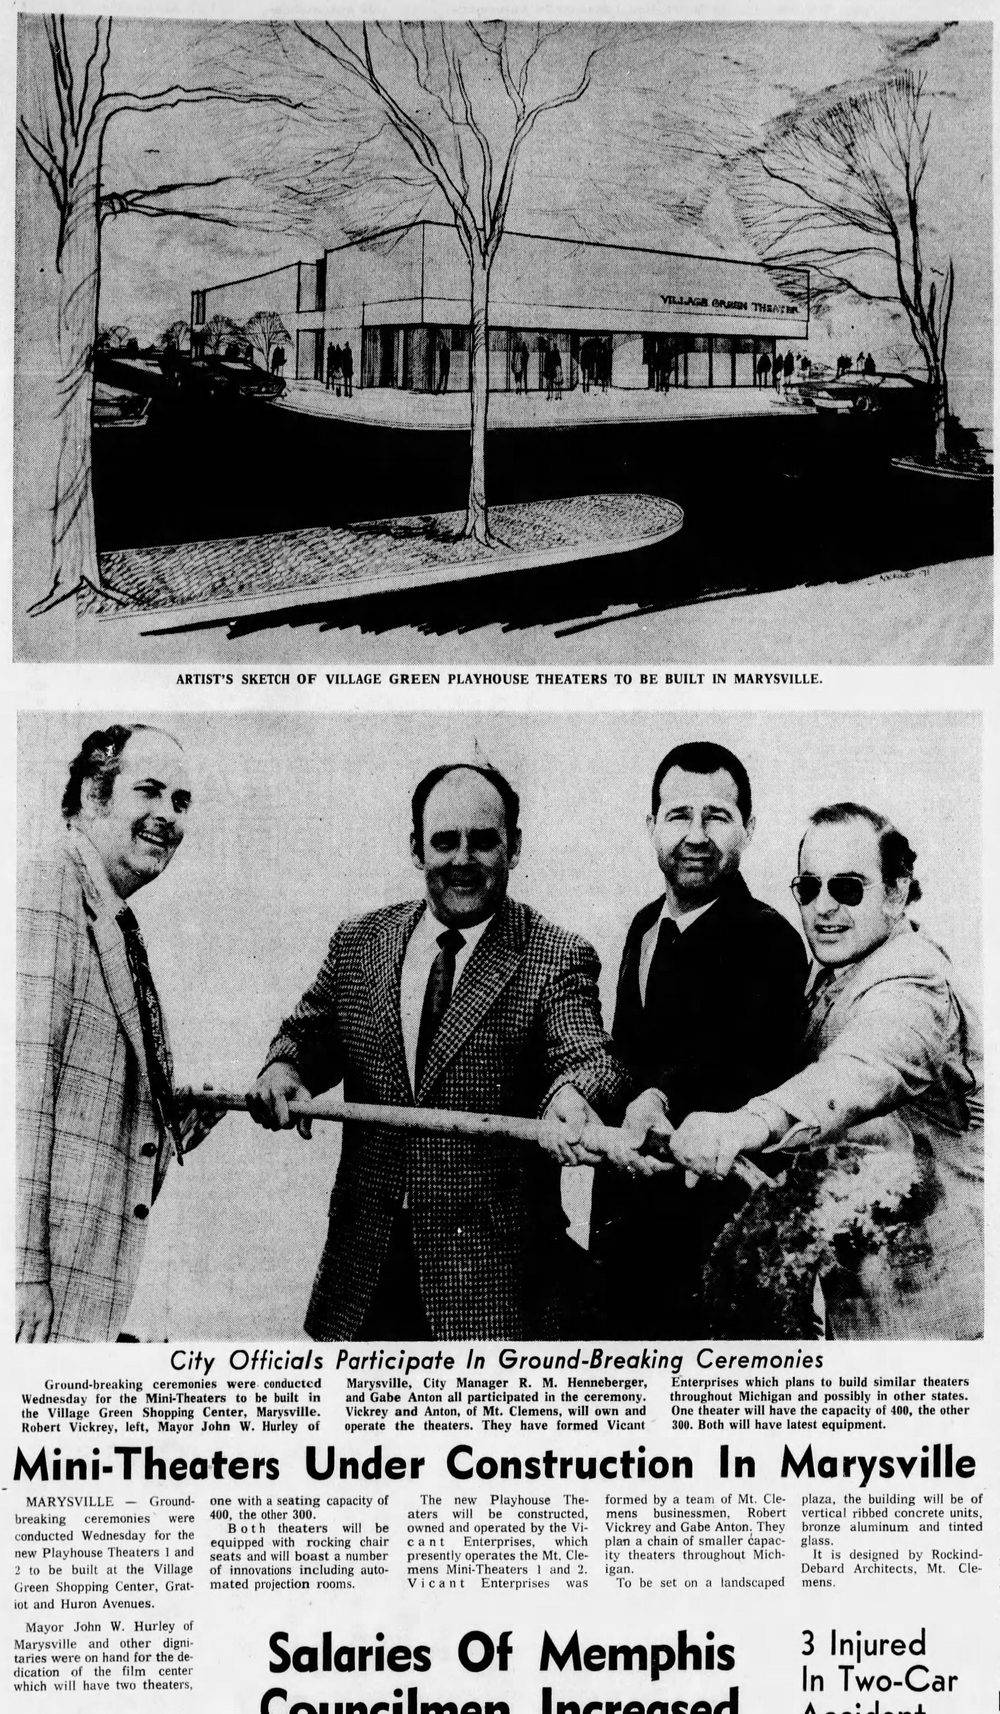 Village Green Theater (Playhouse Theaters) - OCT 1971 ARTICLE ON CONSTRUCTION (newer photo)